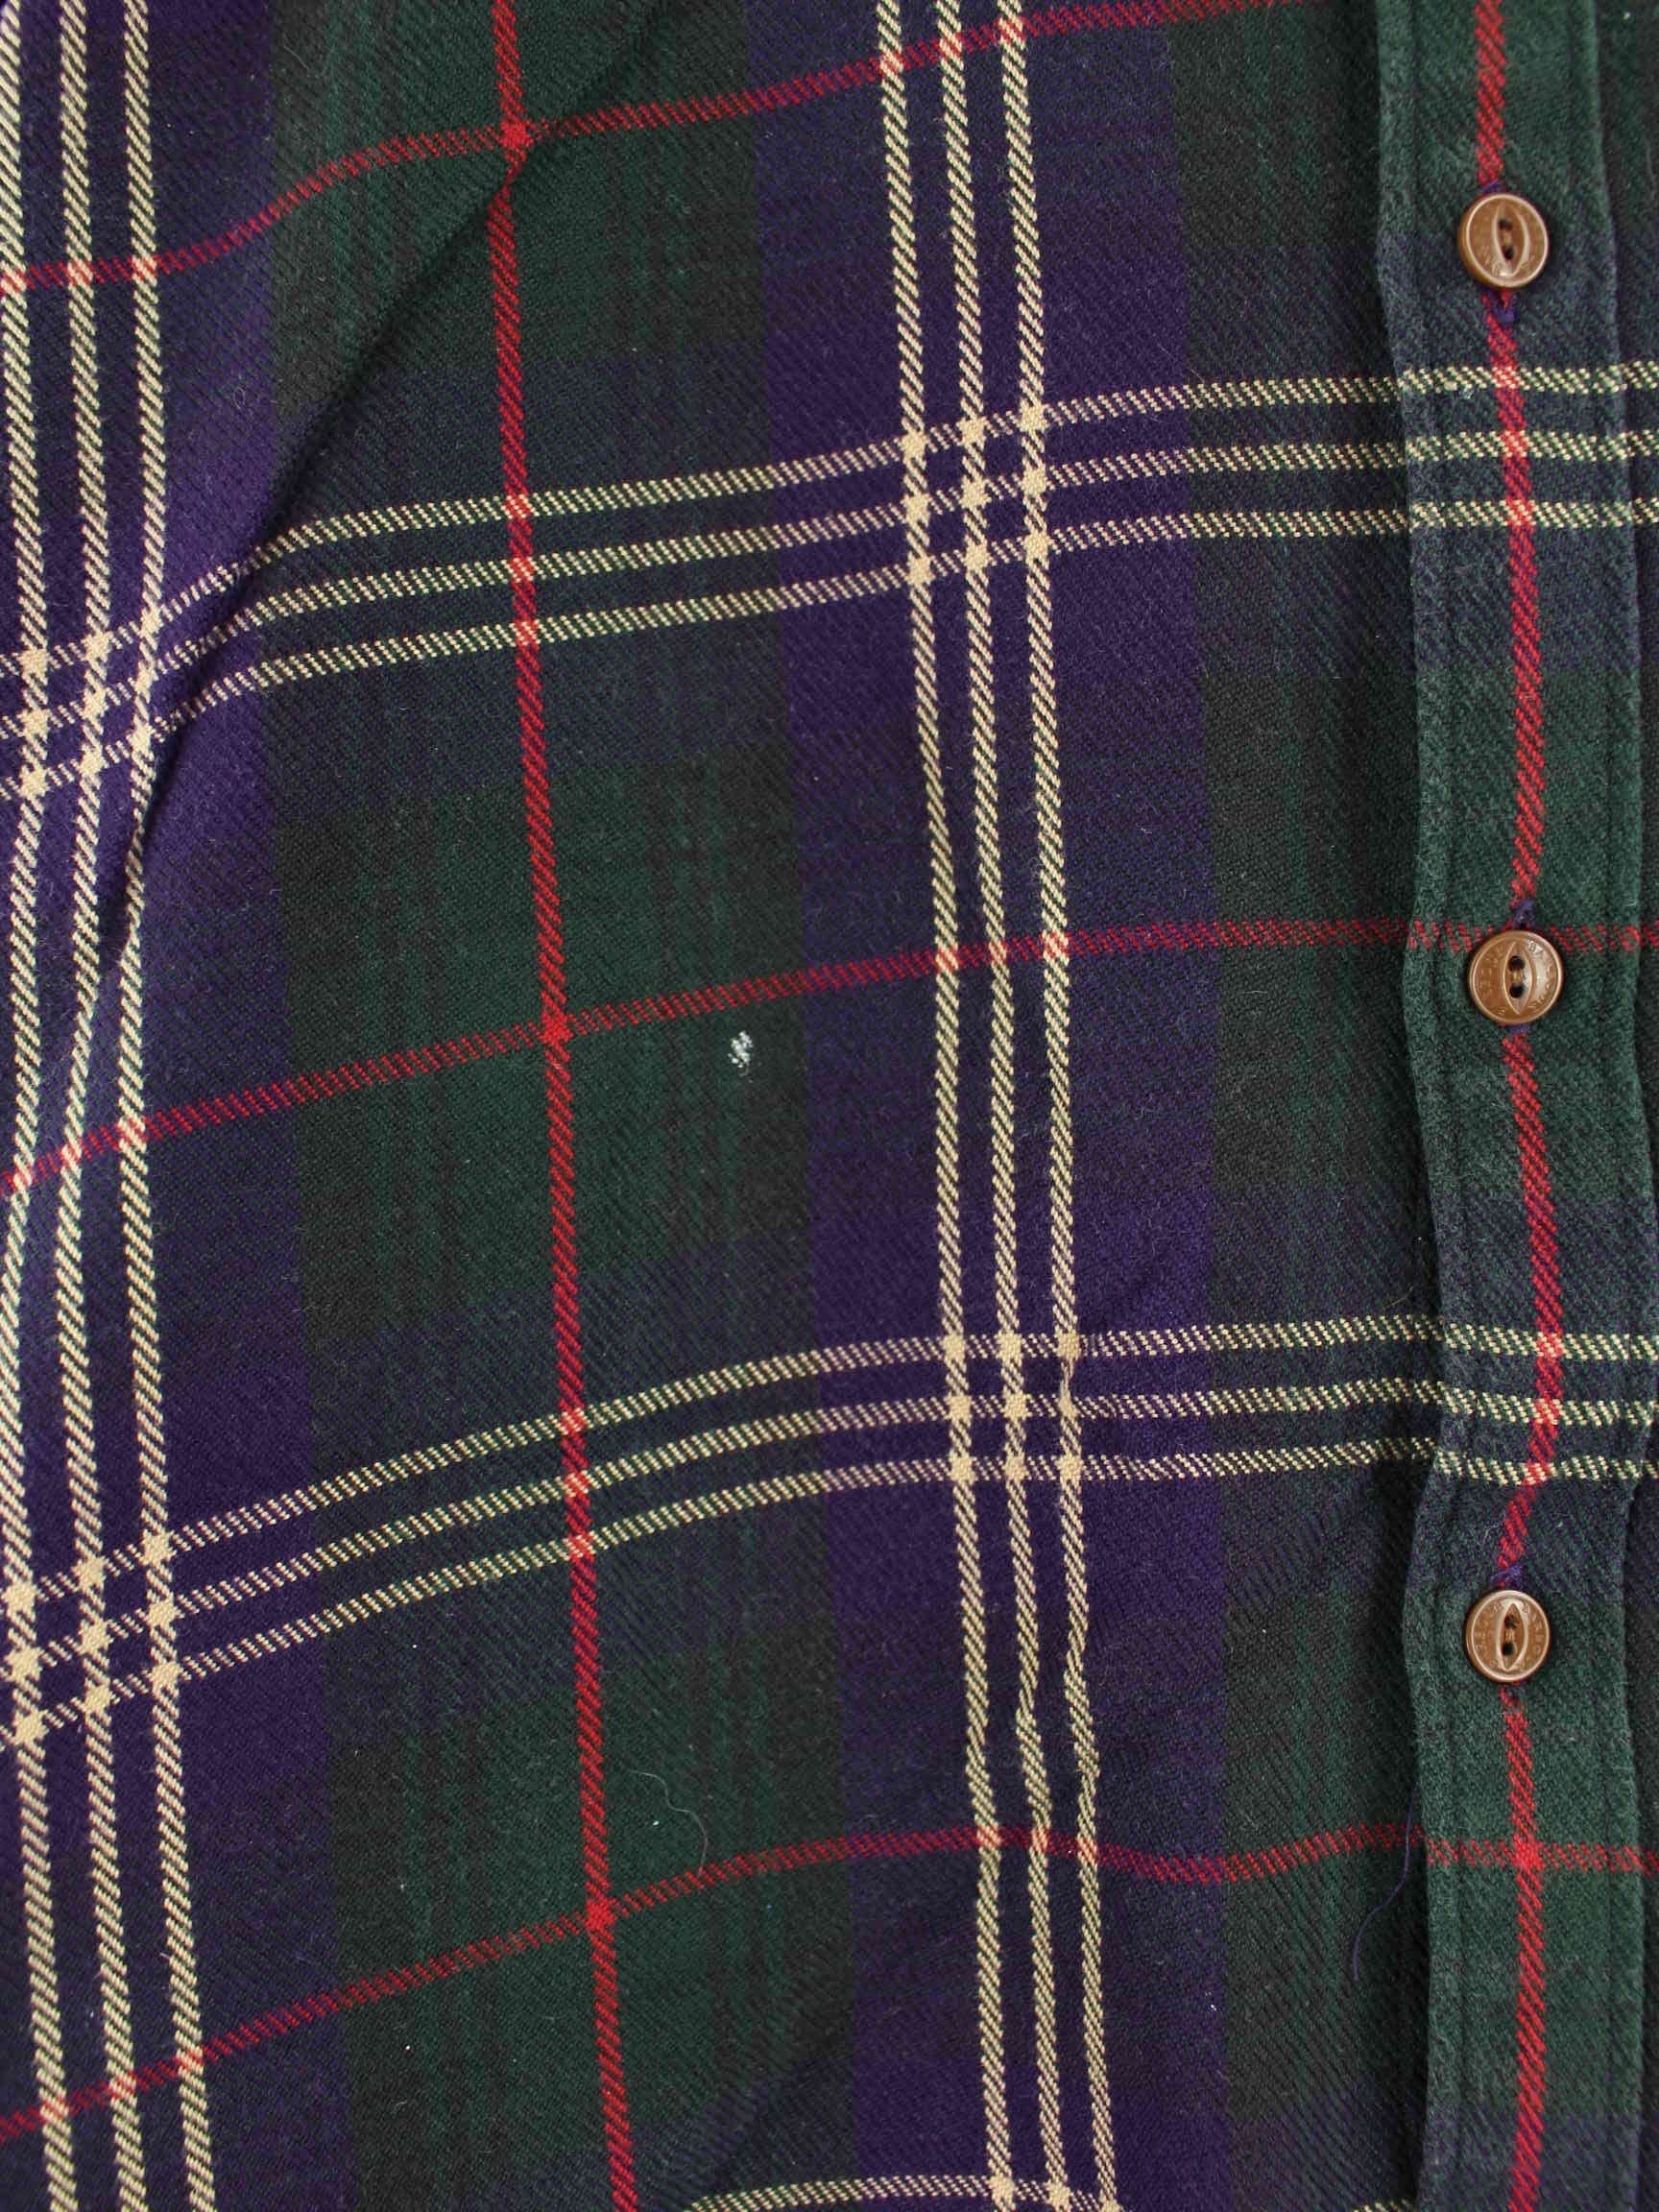 Barbour Flanell Hemd Mehrfarbig XL (detail image 3)